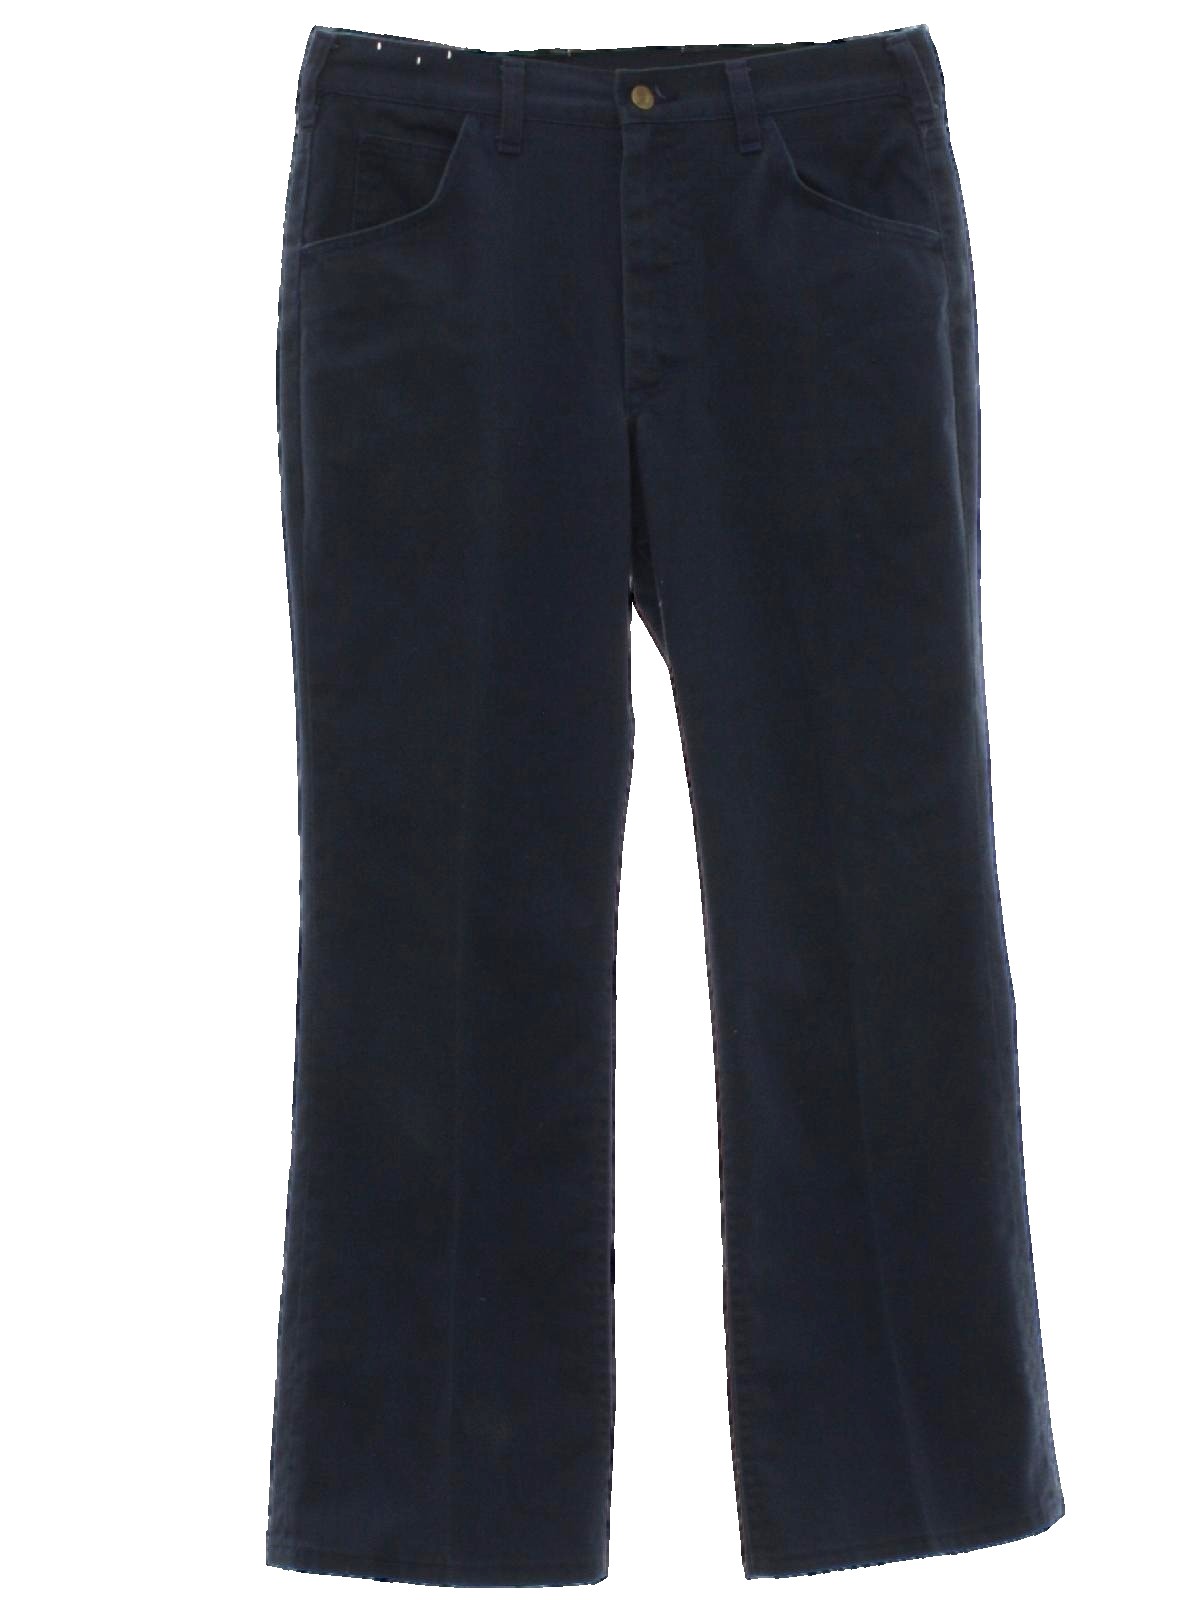 70's Lee Rider Boot Cut Flare Flared Pants / Flares: 70s -Lee Rider ...